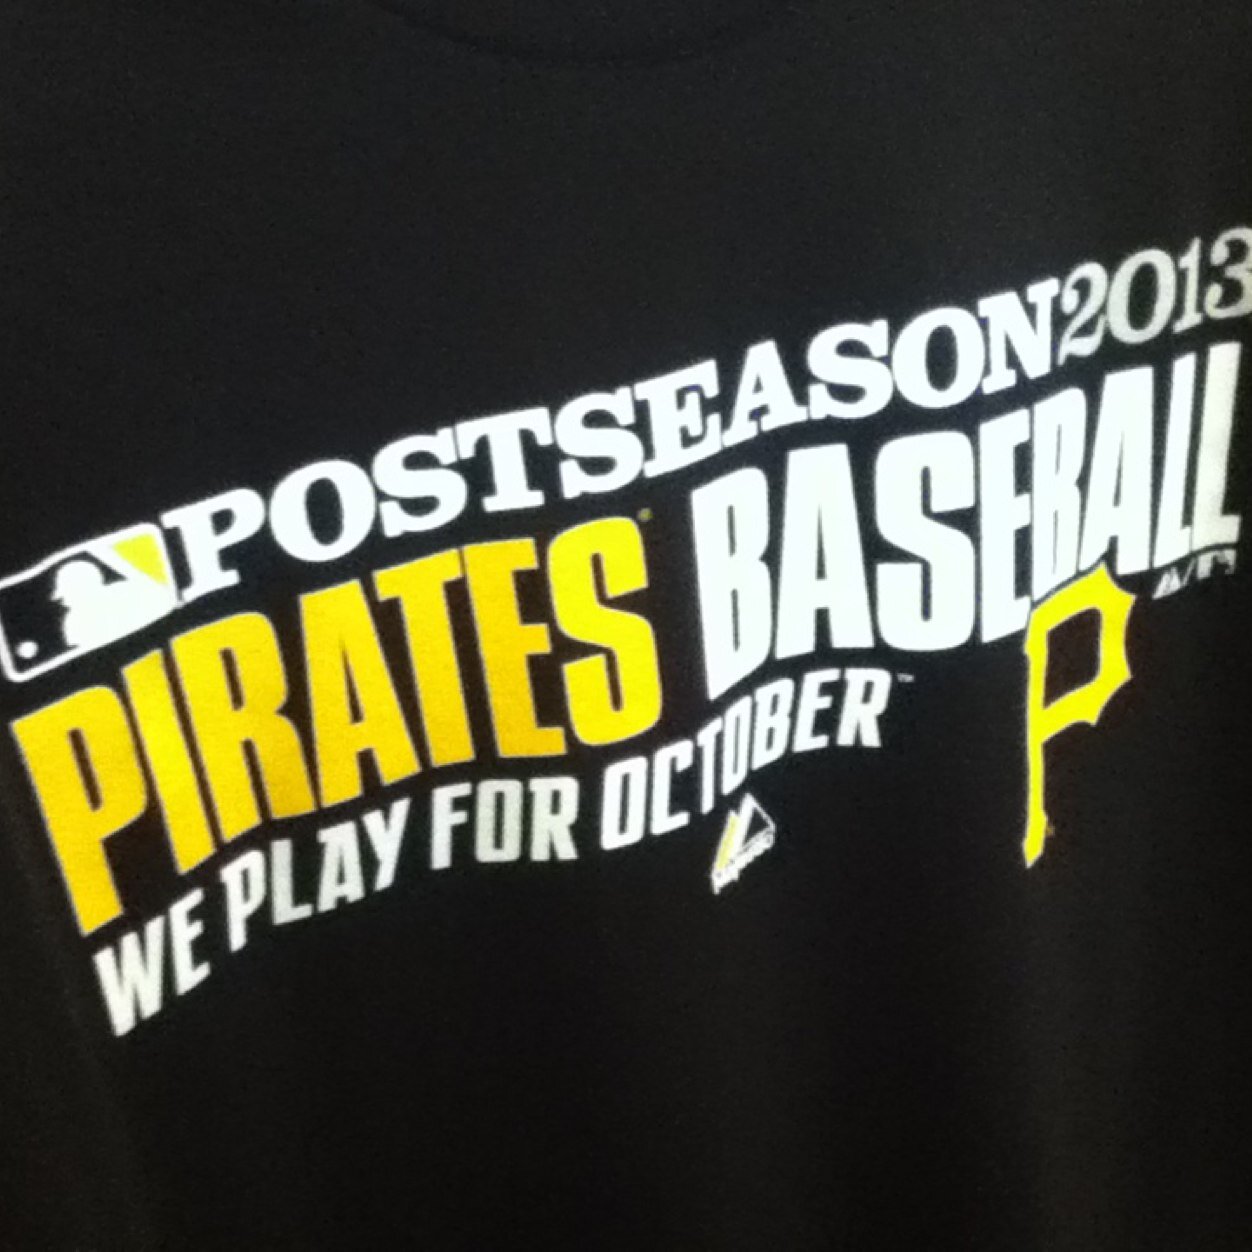 Fan of the Pirates